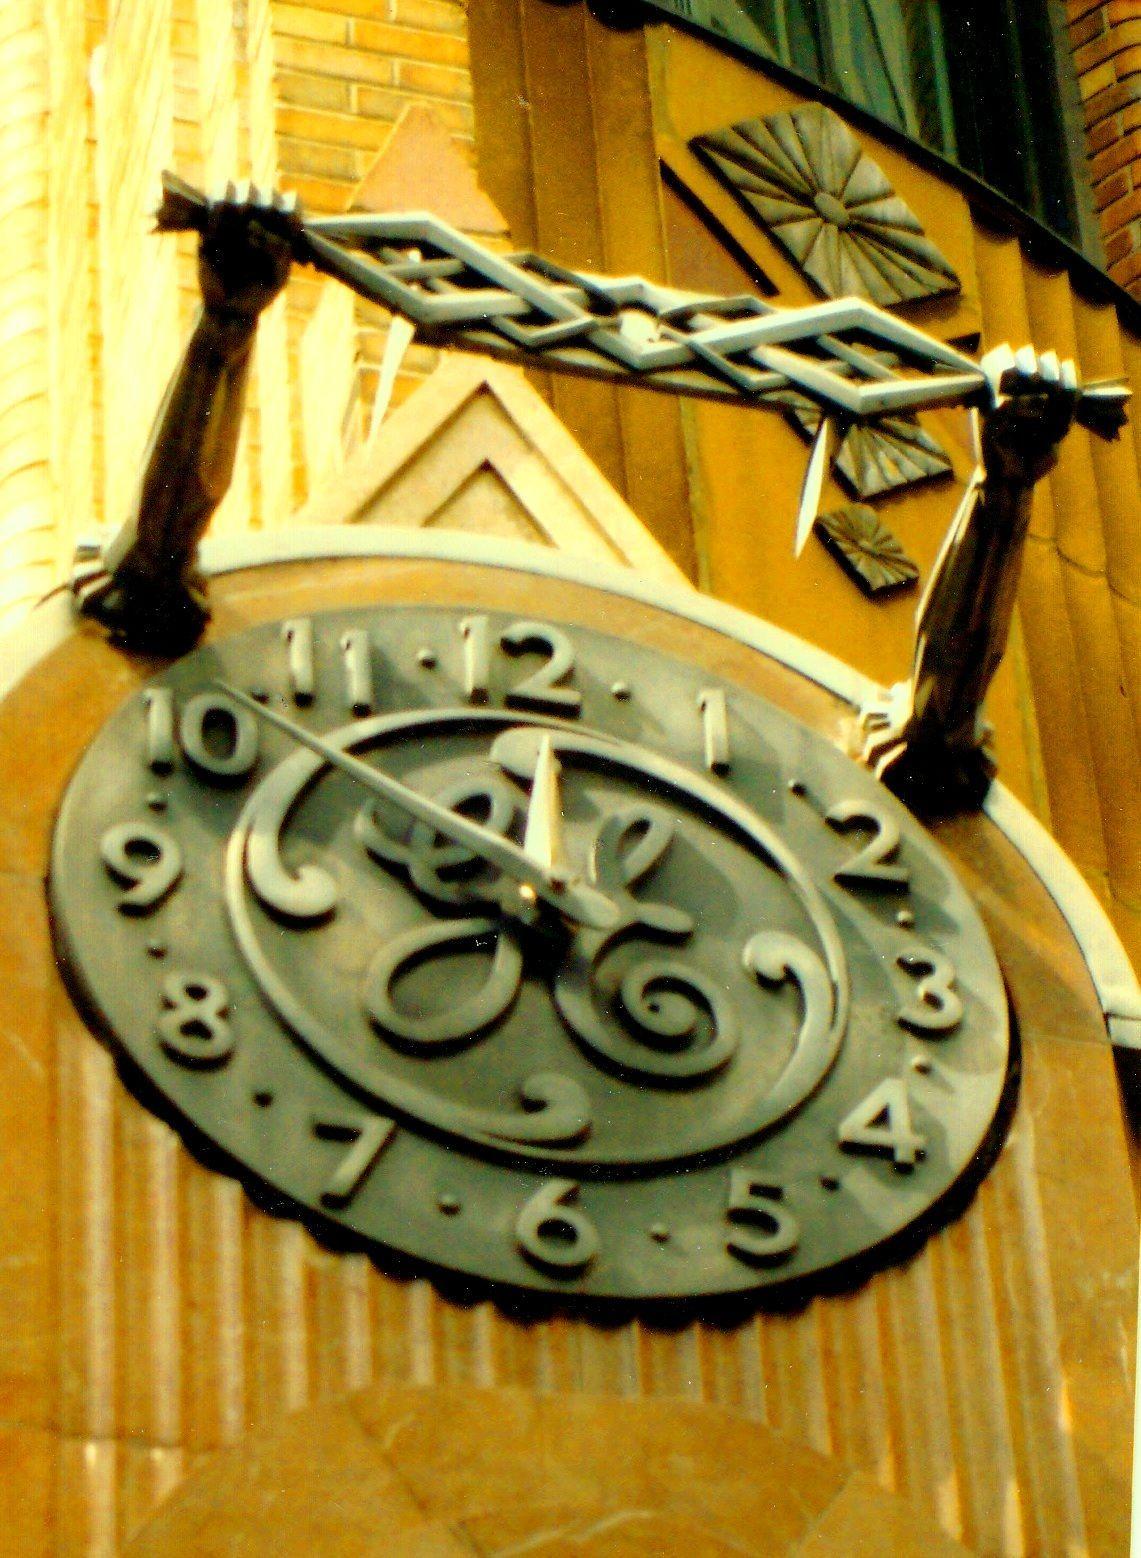 Old General Electric Logo - The General Electric logo dates from 1900, this clock from 1931, the ...